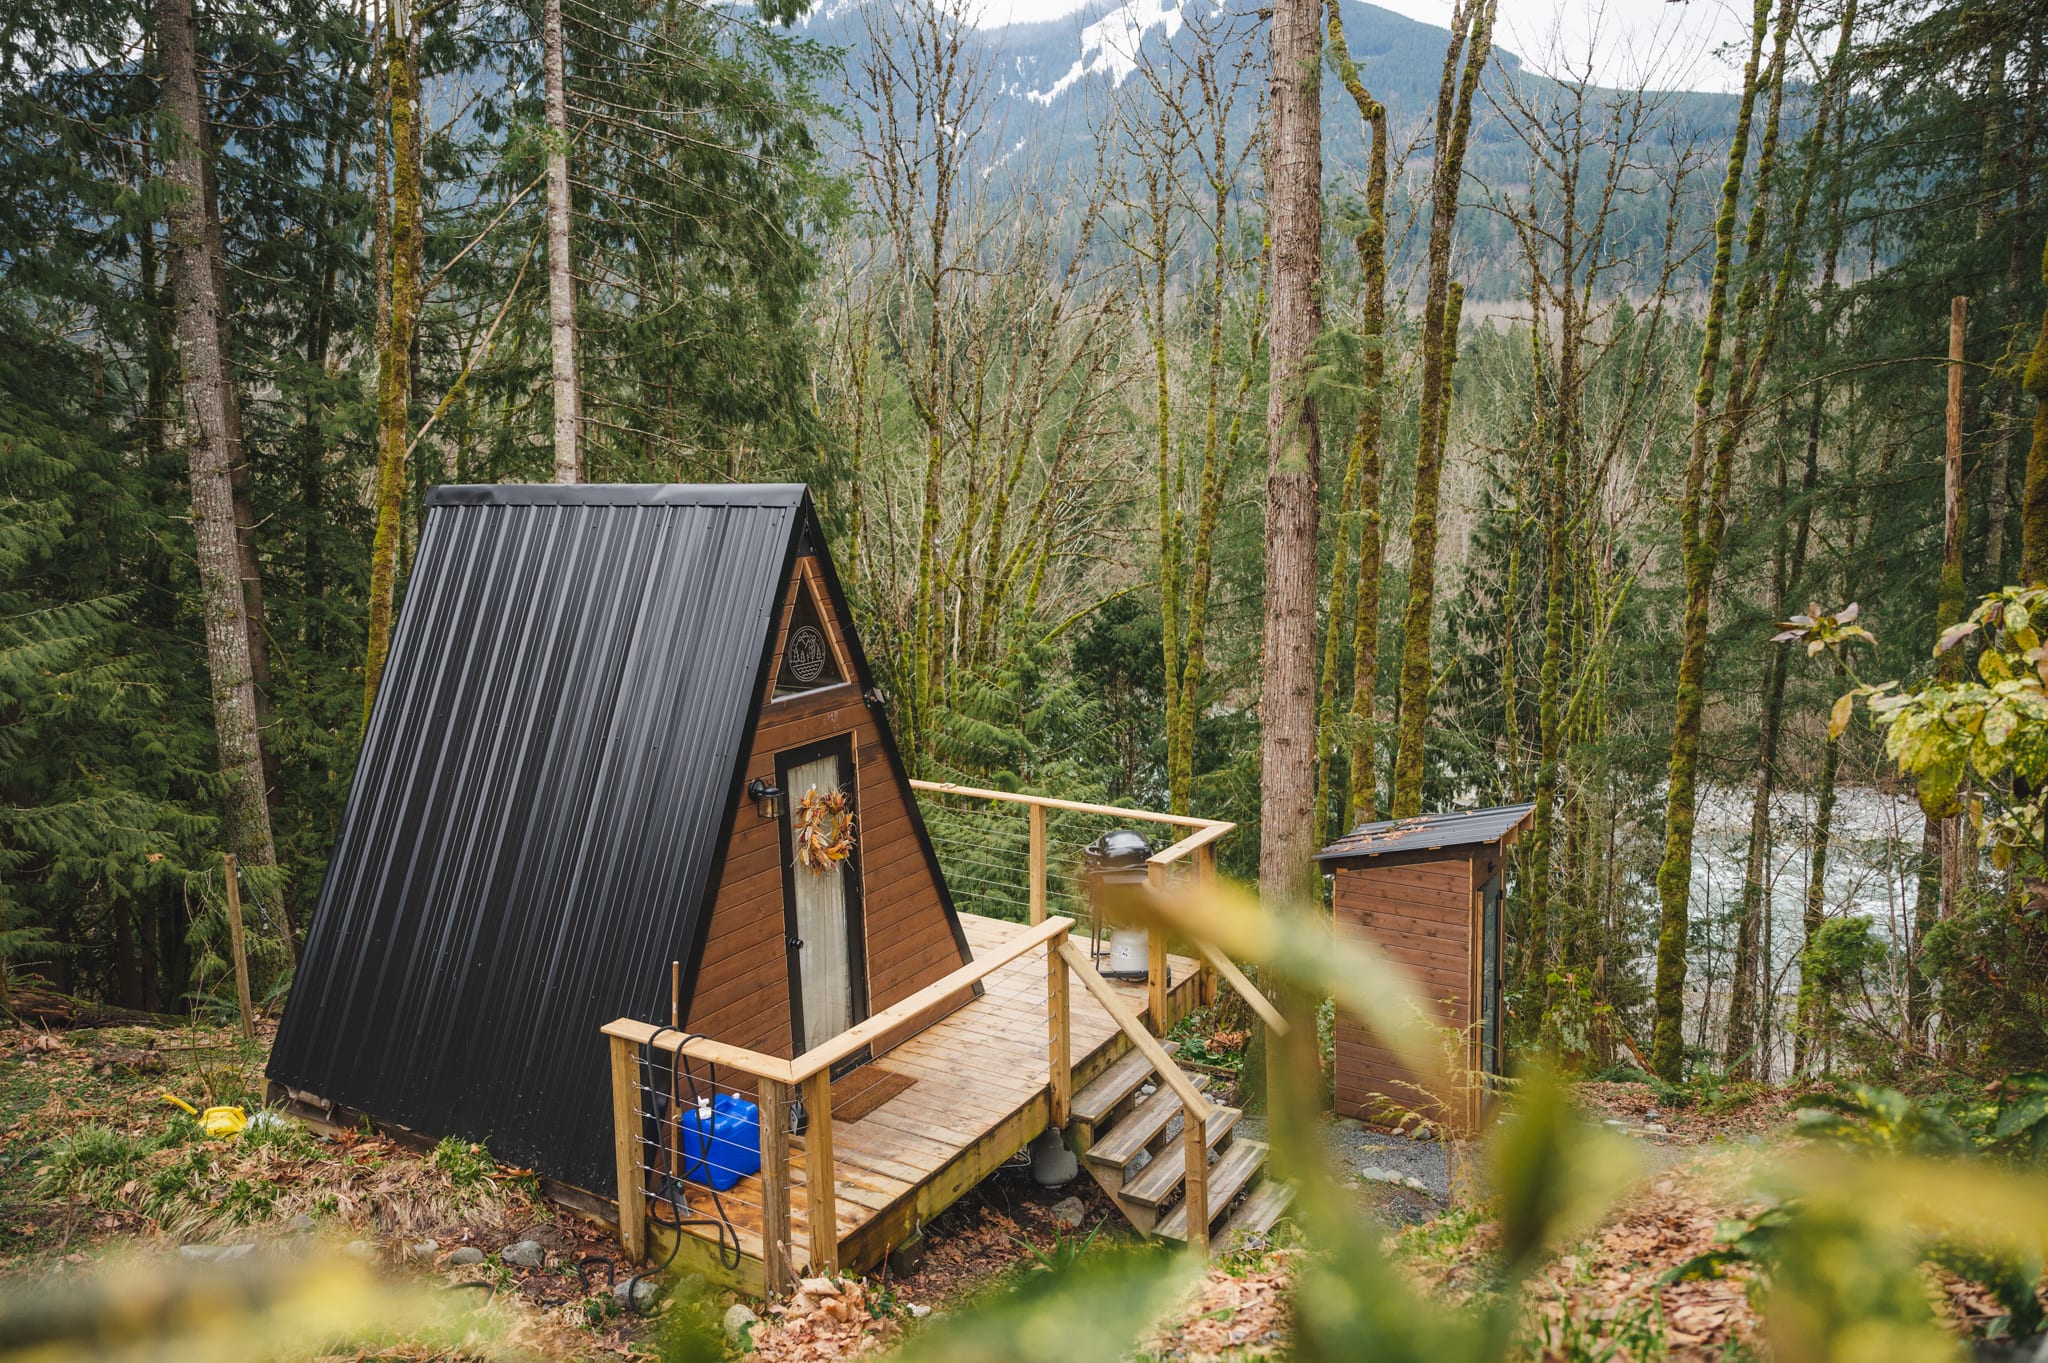 The A-frame is down the hill from the owner's home, but it feels very secluded and private.